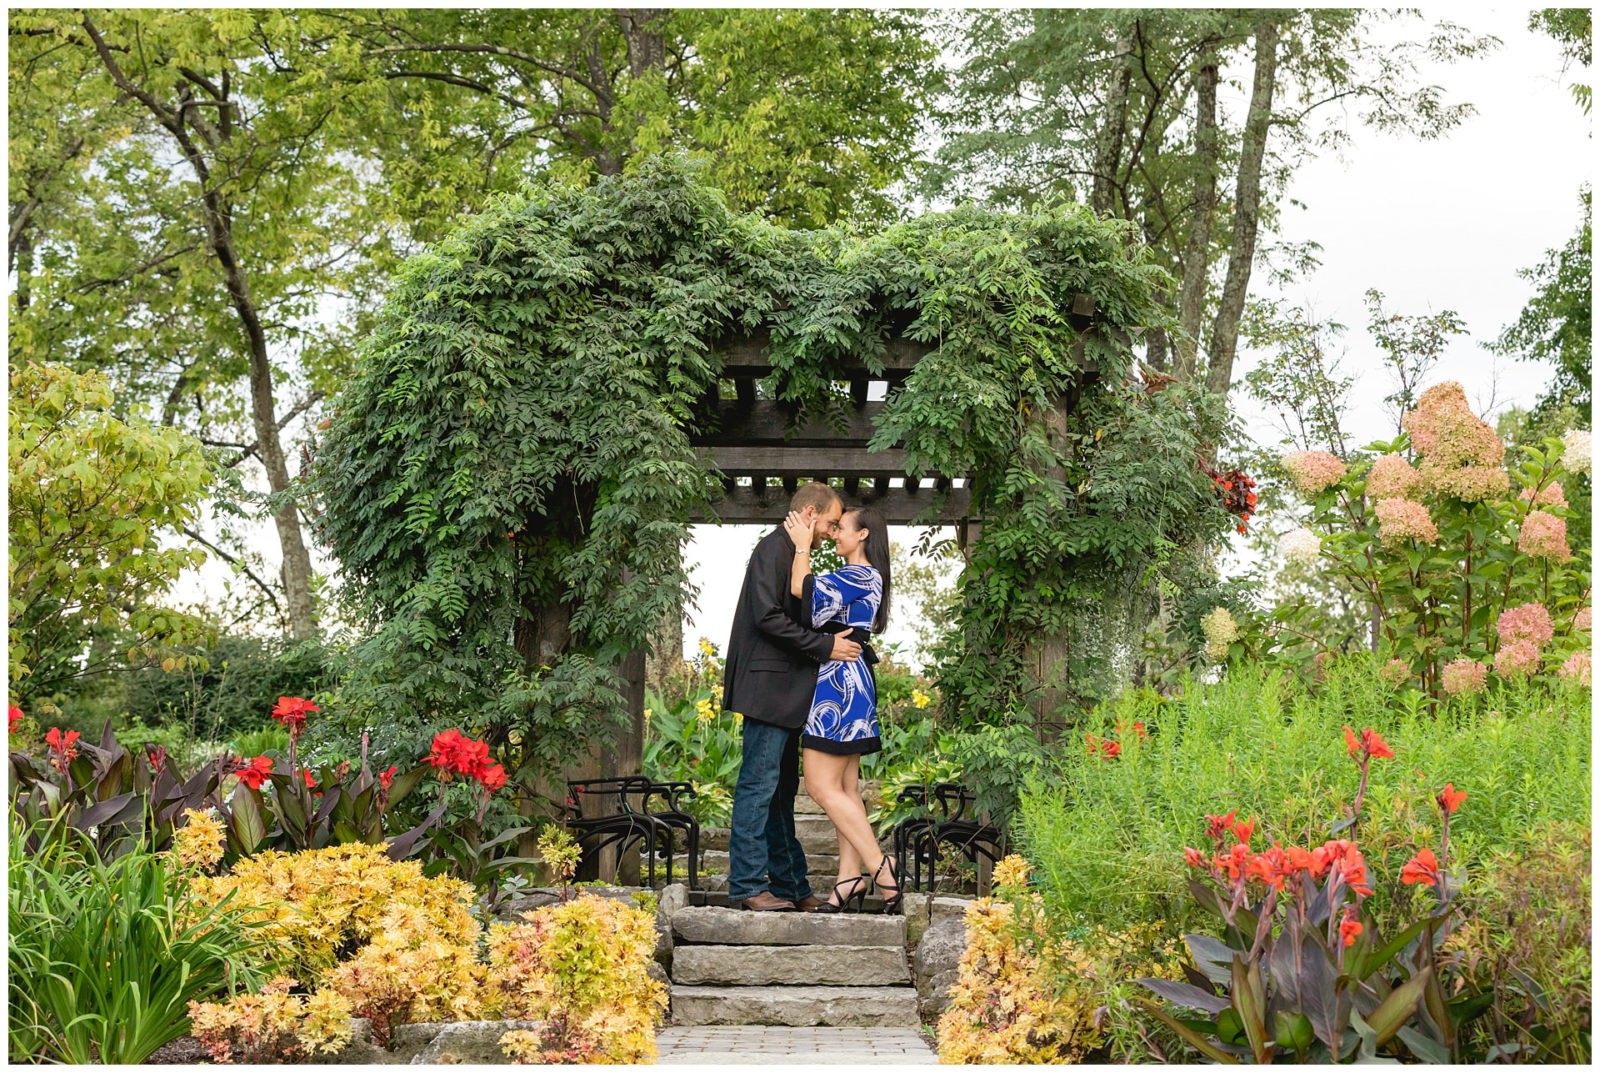 Engagement photos at Buffalo Trace Distillery in Frankfort, KY